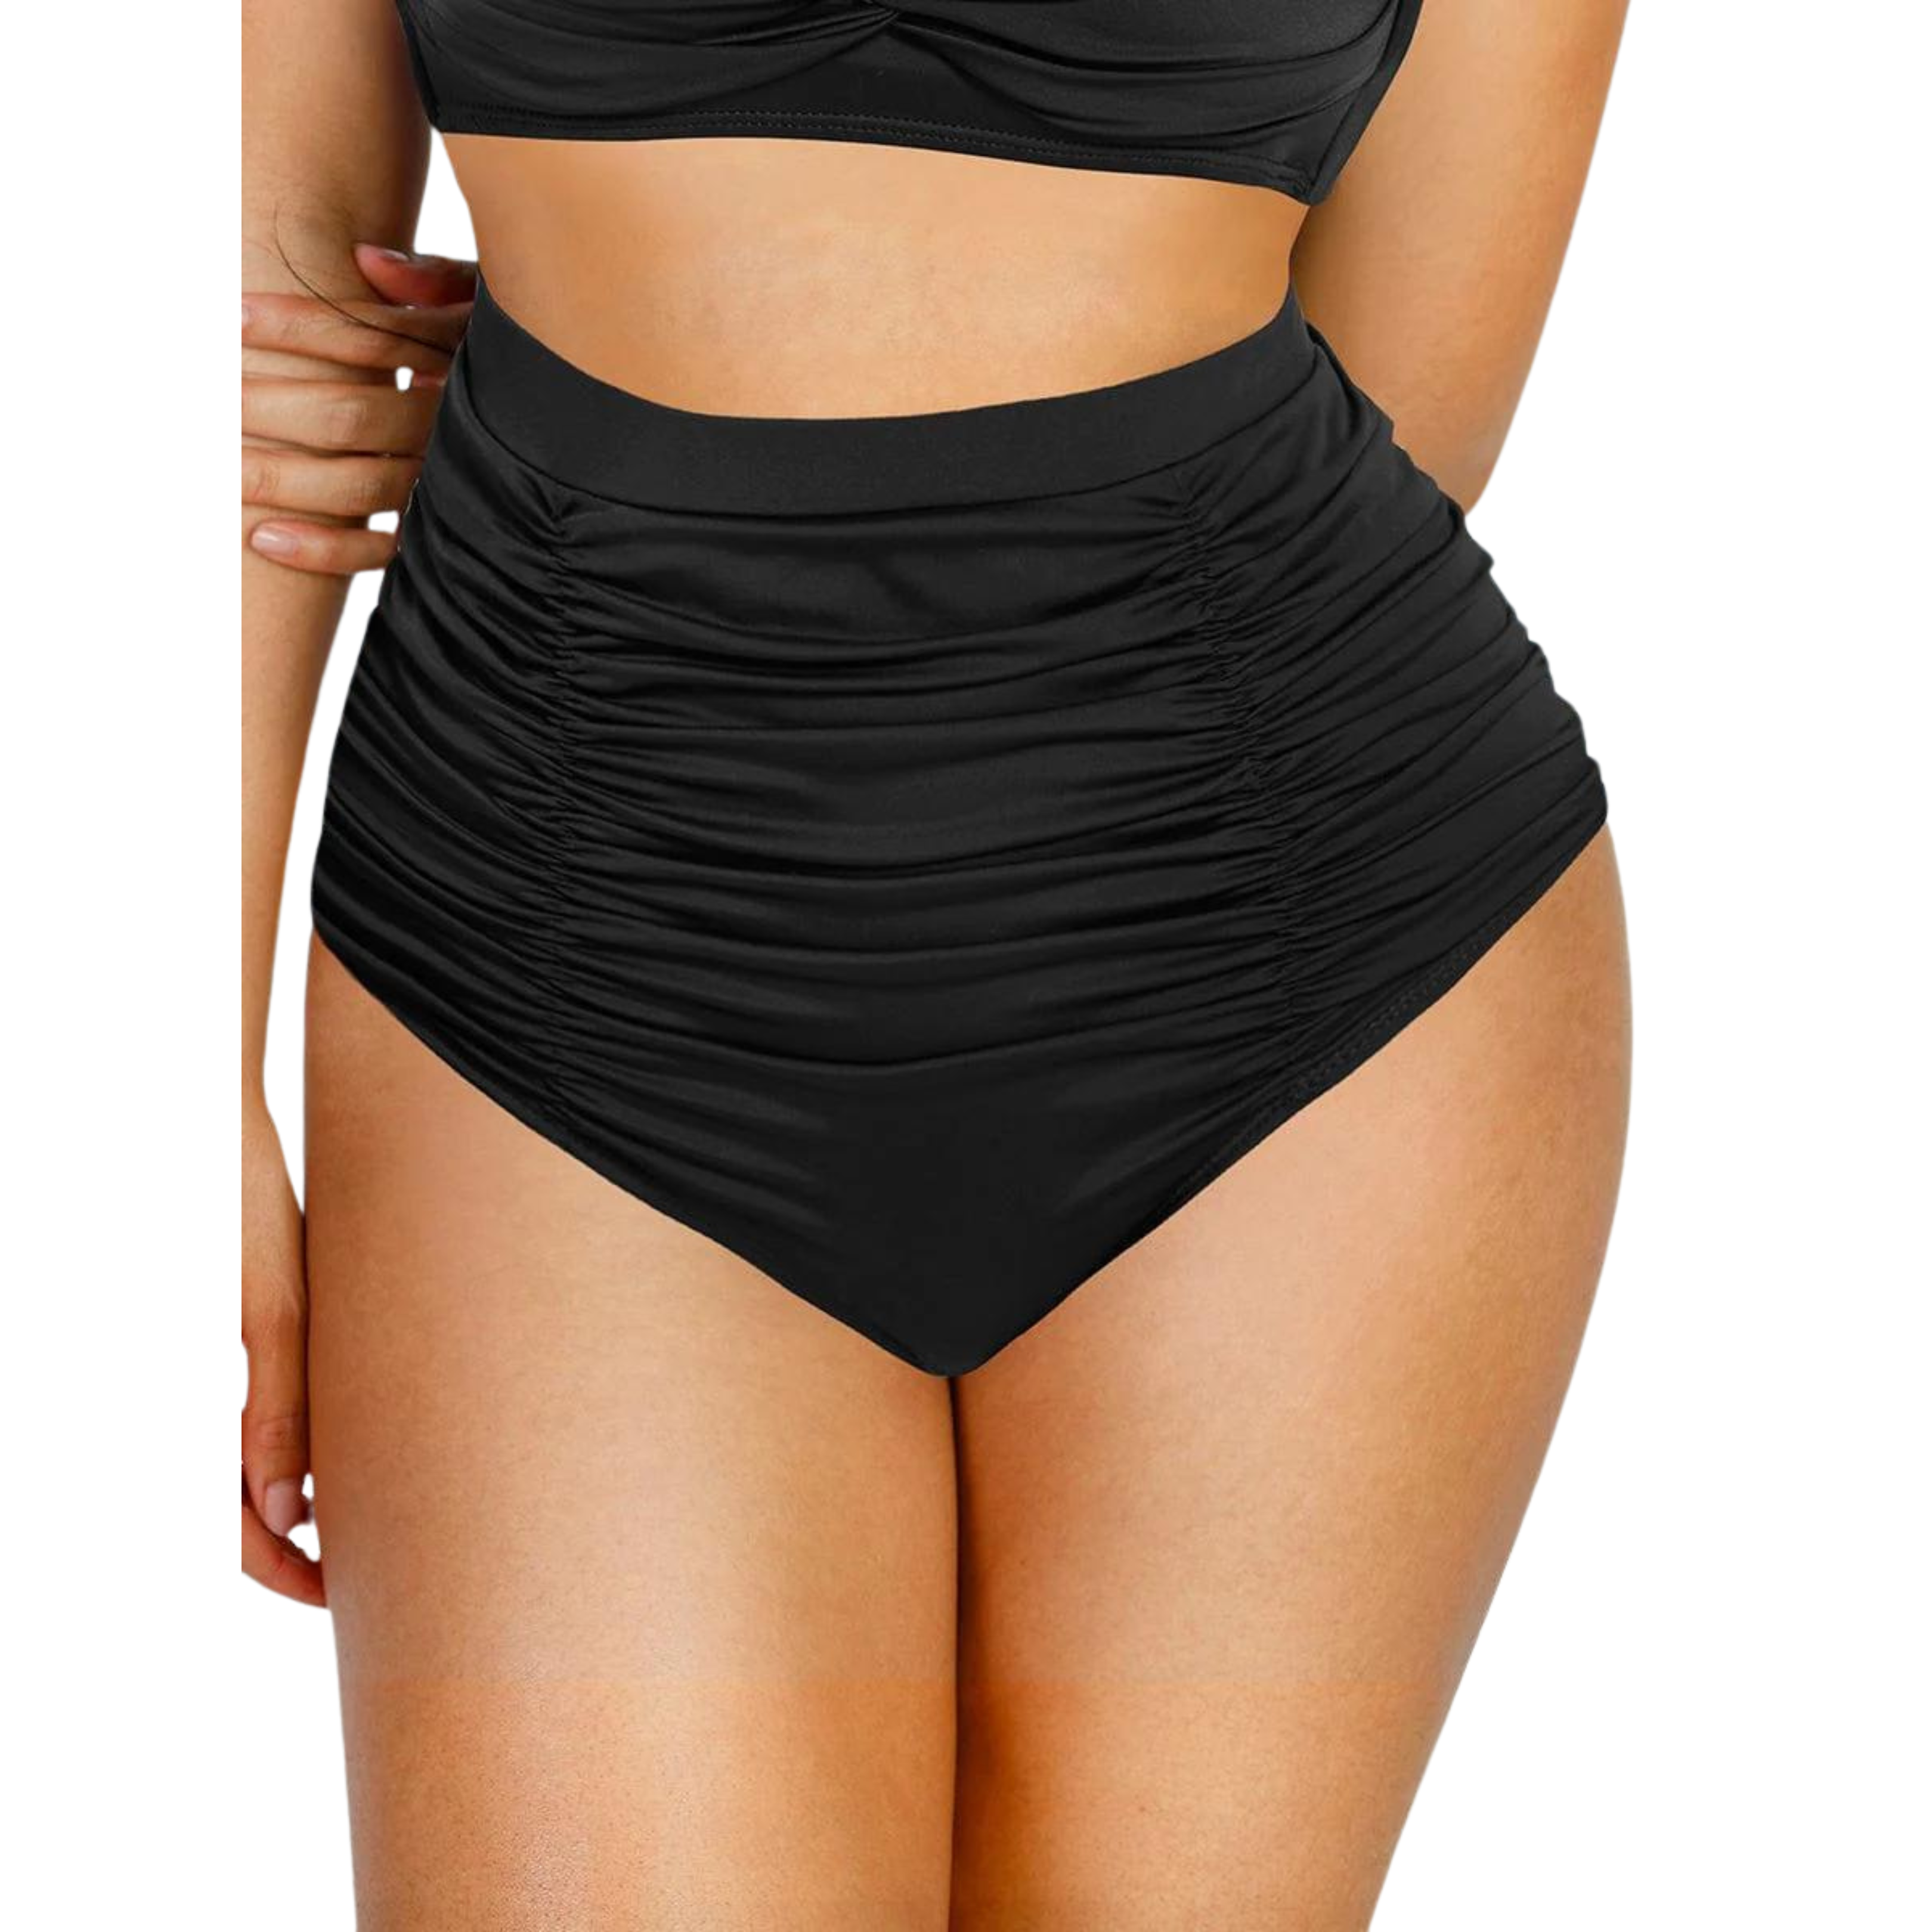 Two Piece Pleating High Waist Compression Swim Suit